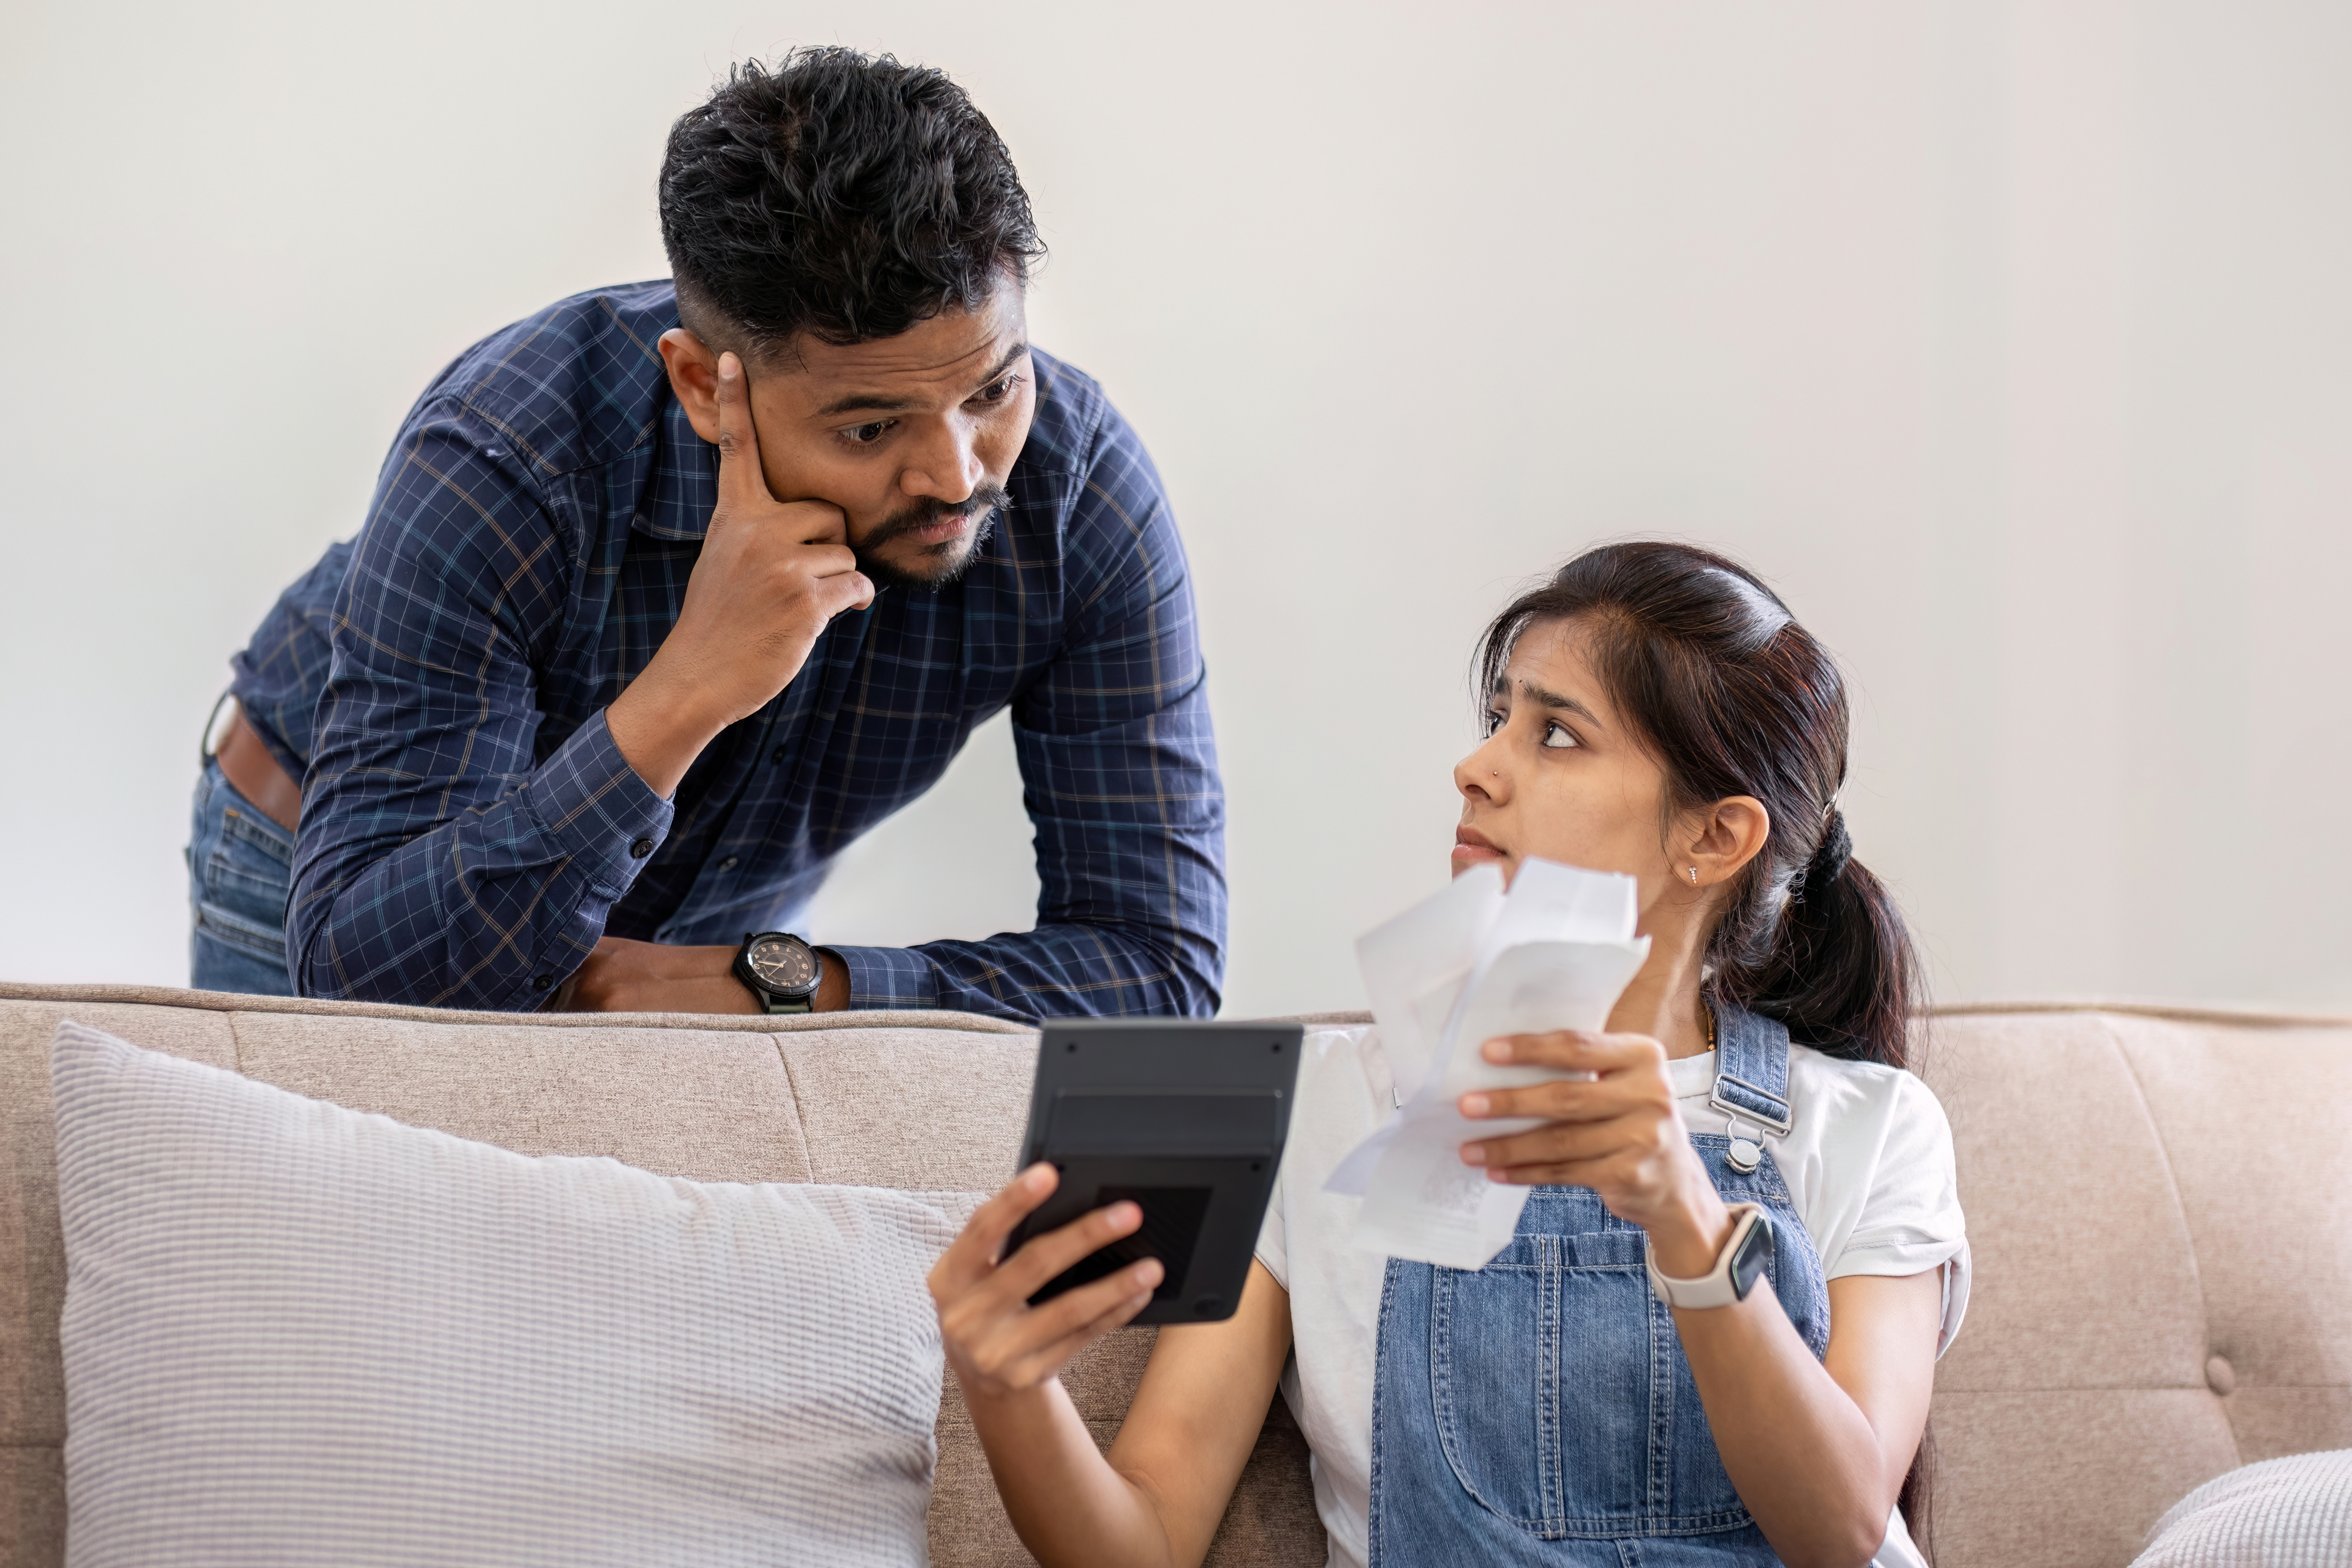 A man and a woman at a couch looking at bills and a calculator